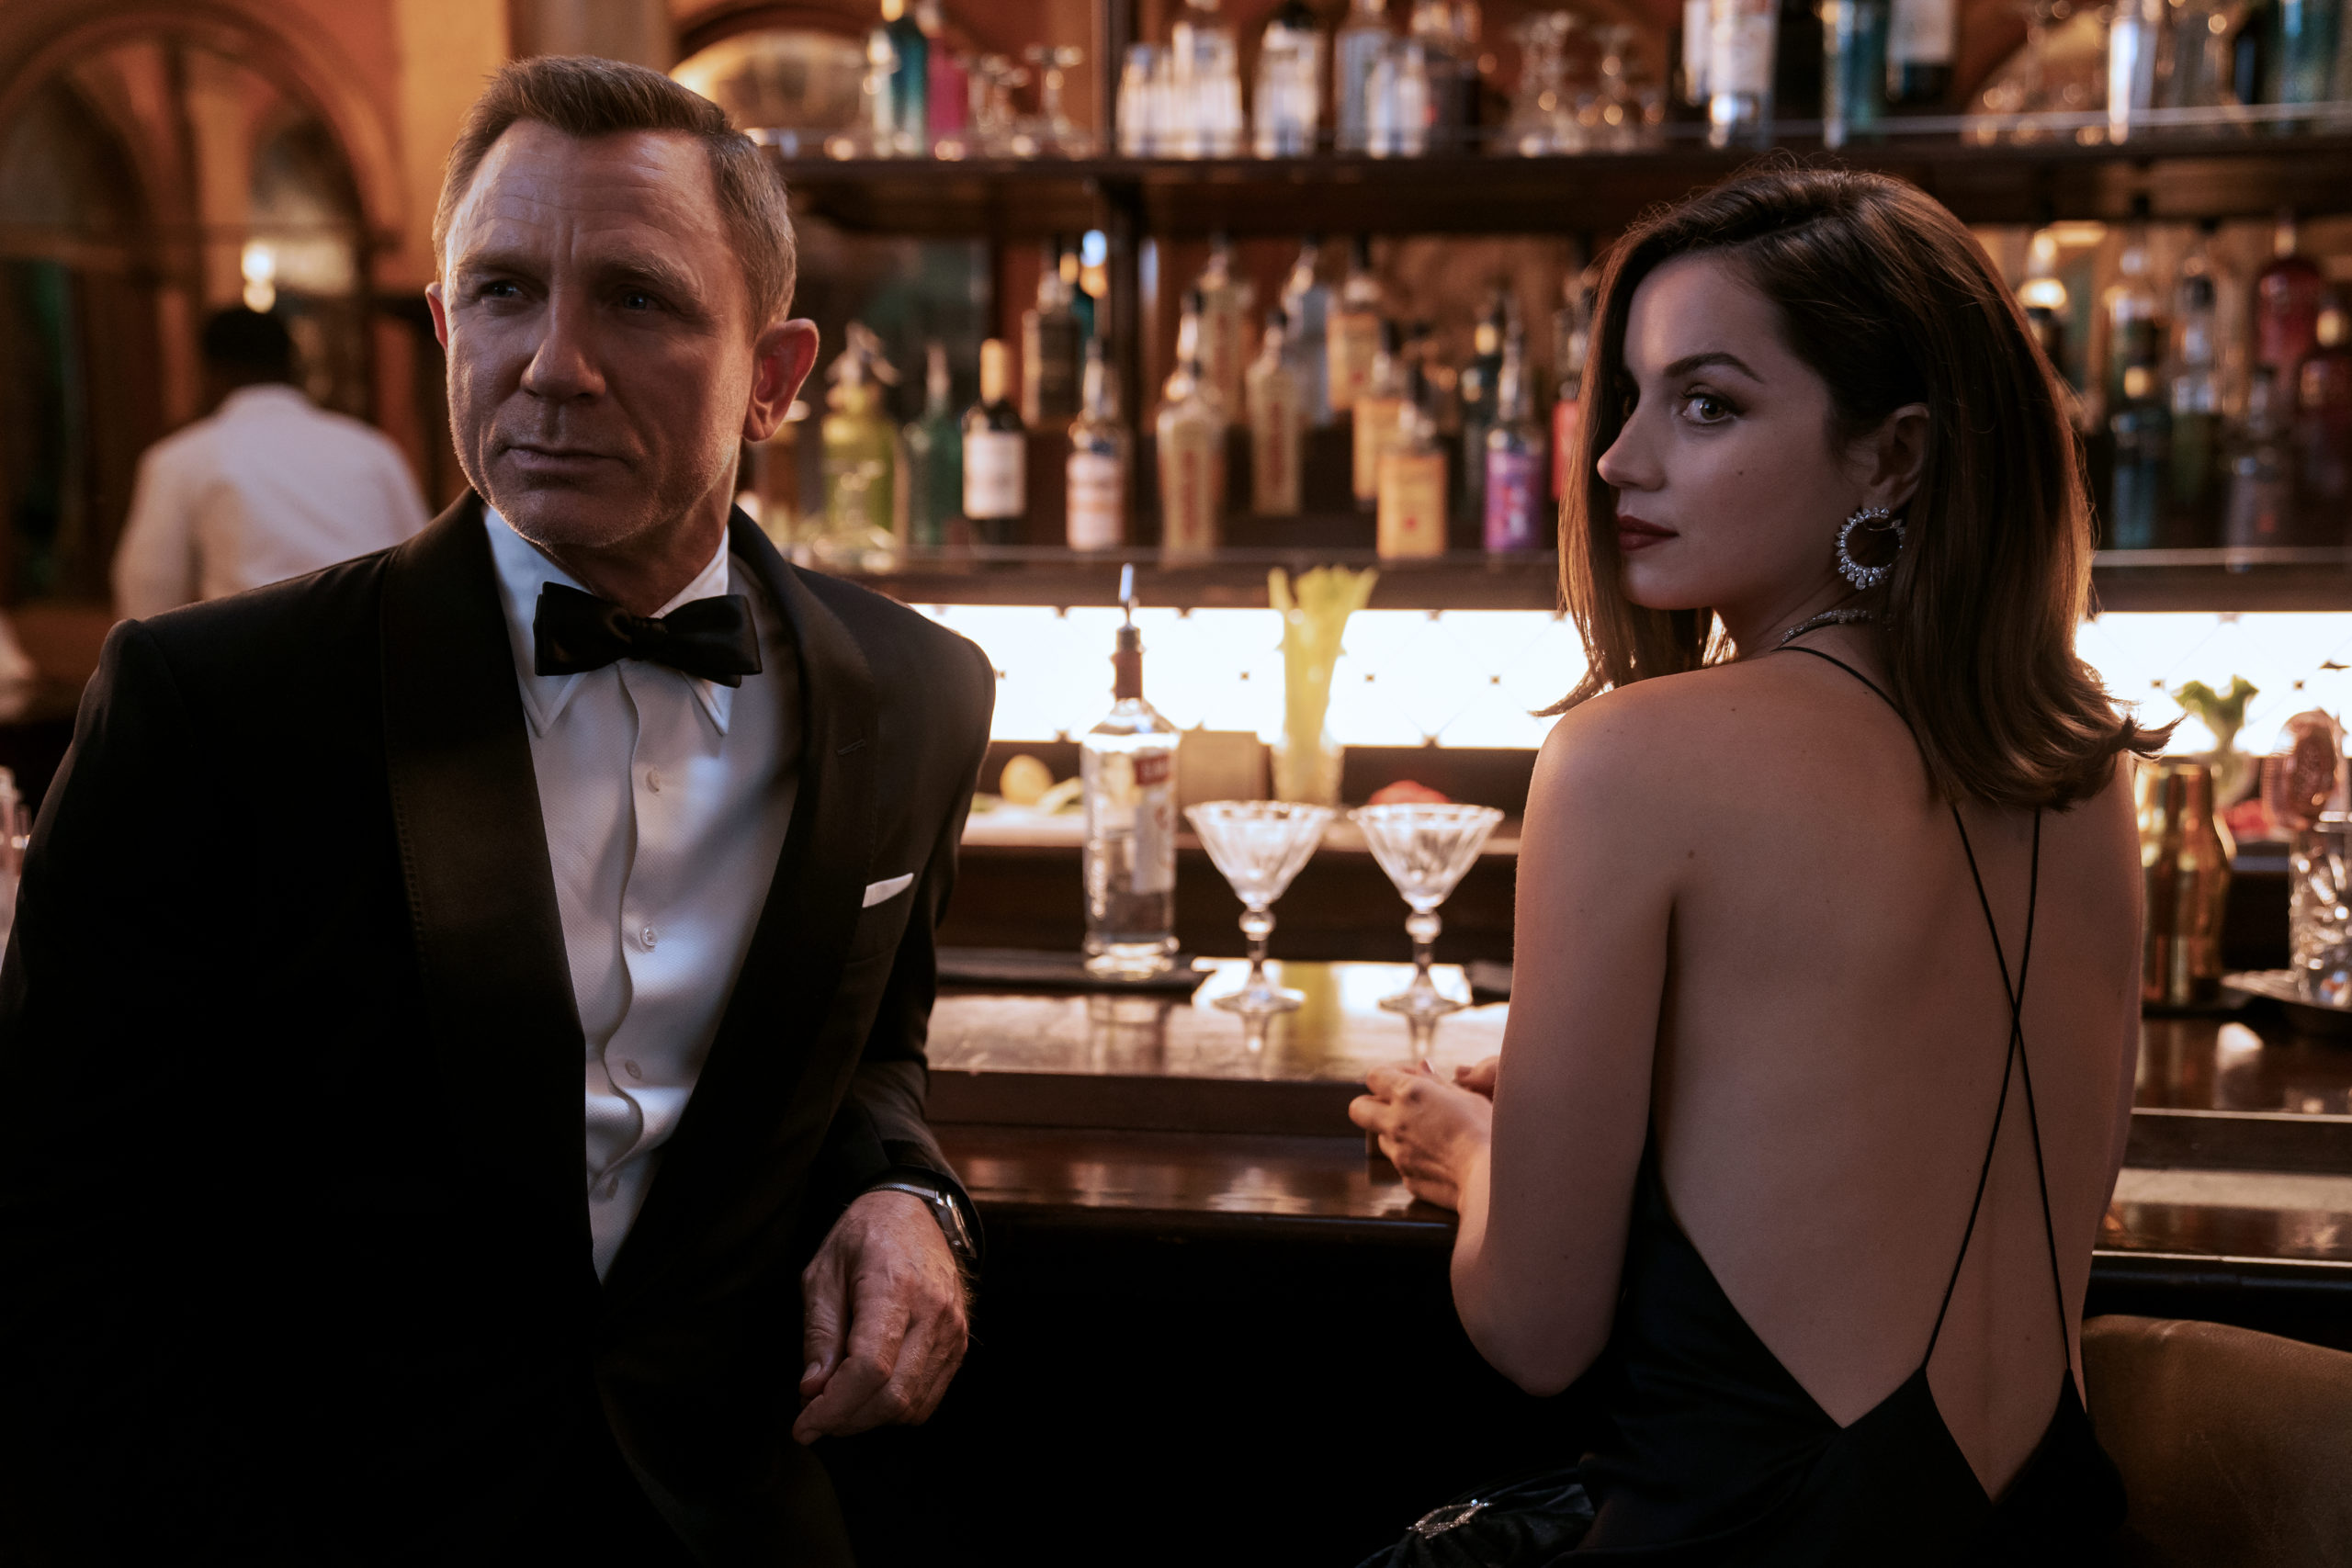 From Bond to Wes Anderson, Here Are the Biggest Movies Still To Come in 2021